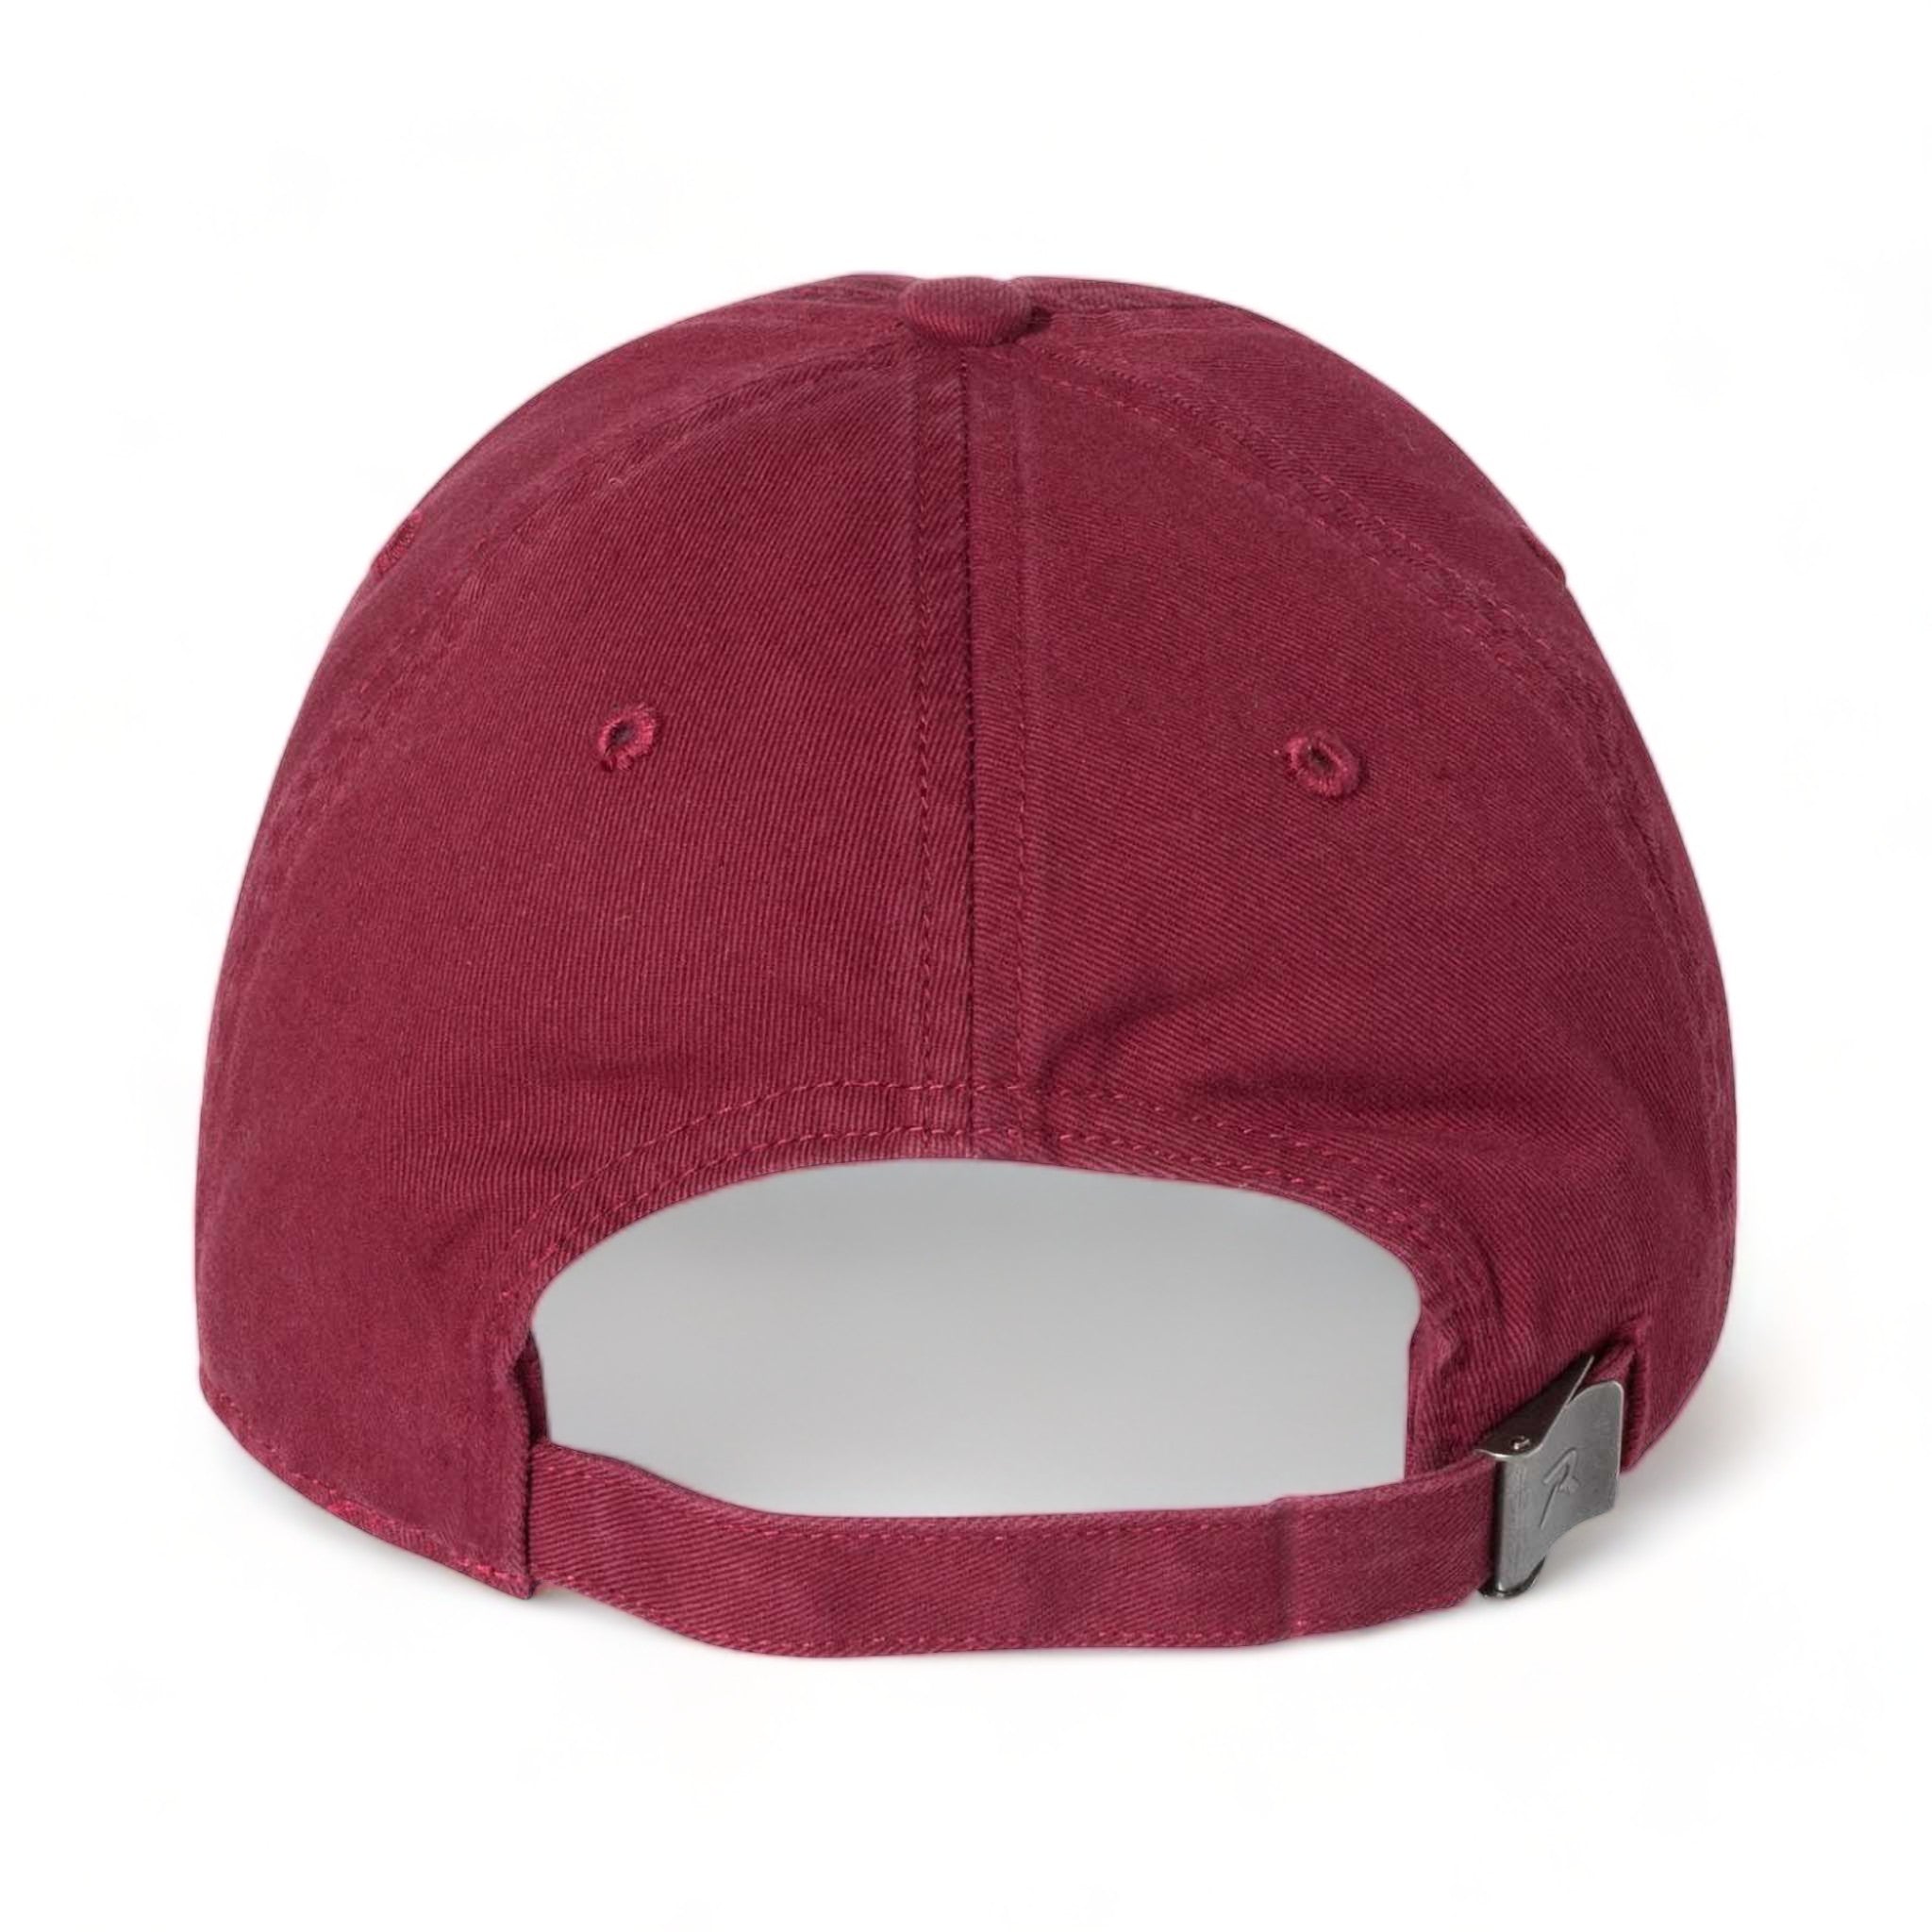 Back view of Richardson 320 custom hat in cardinal